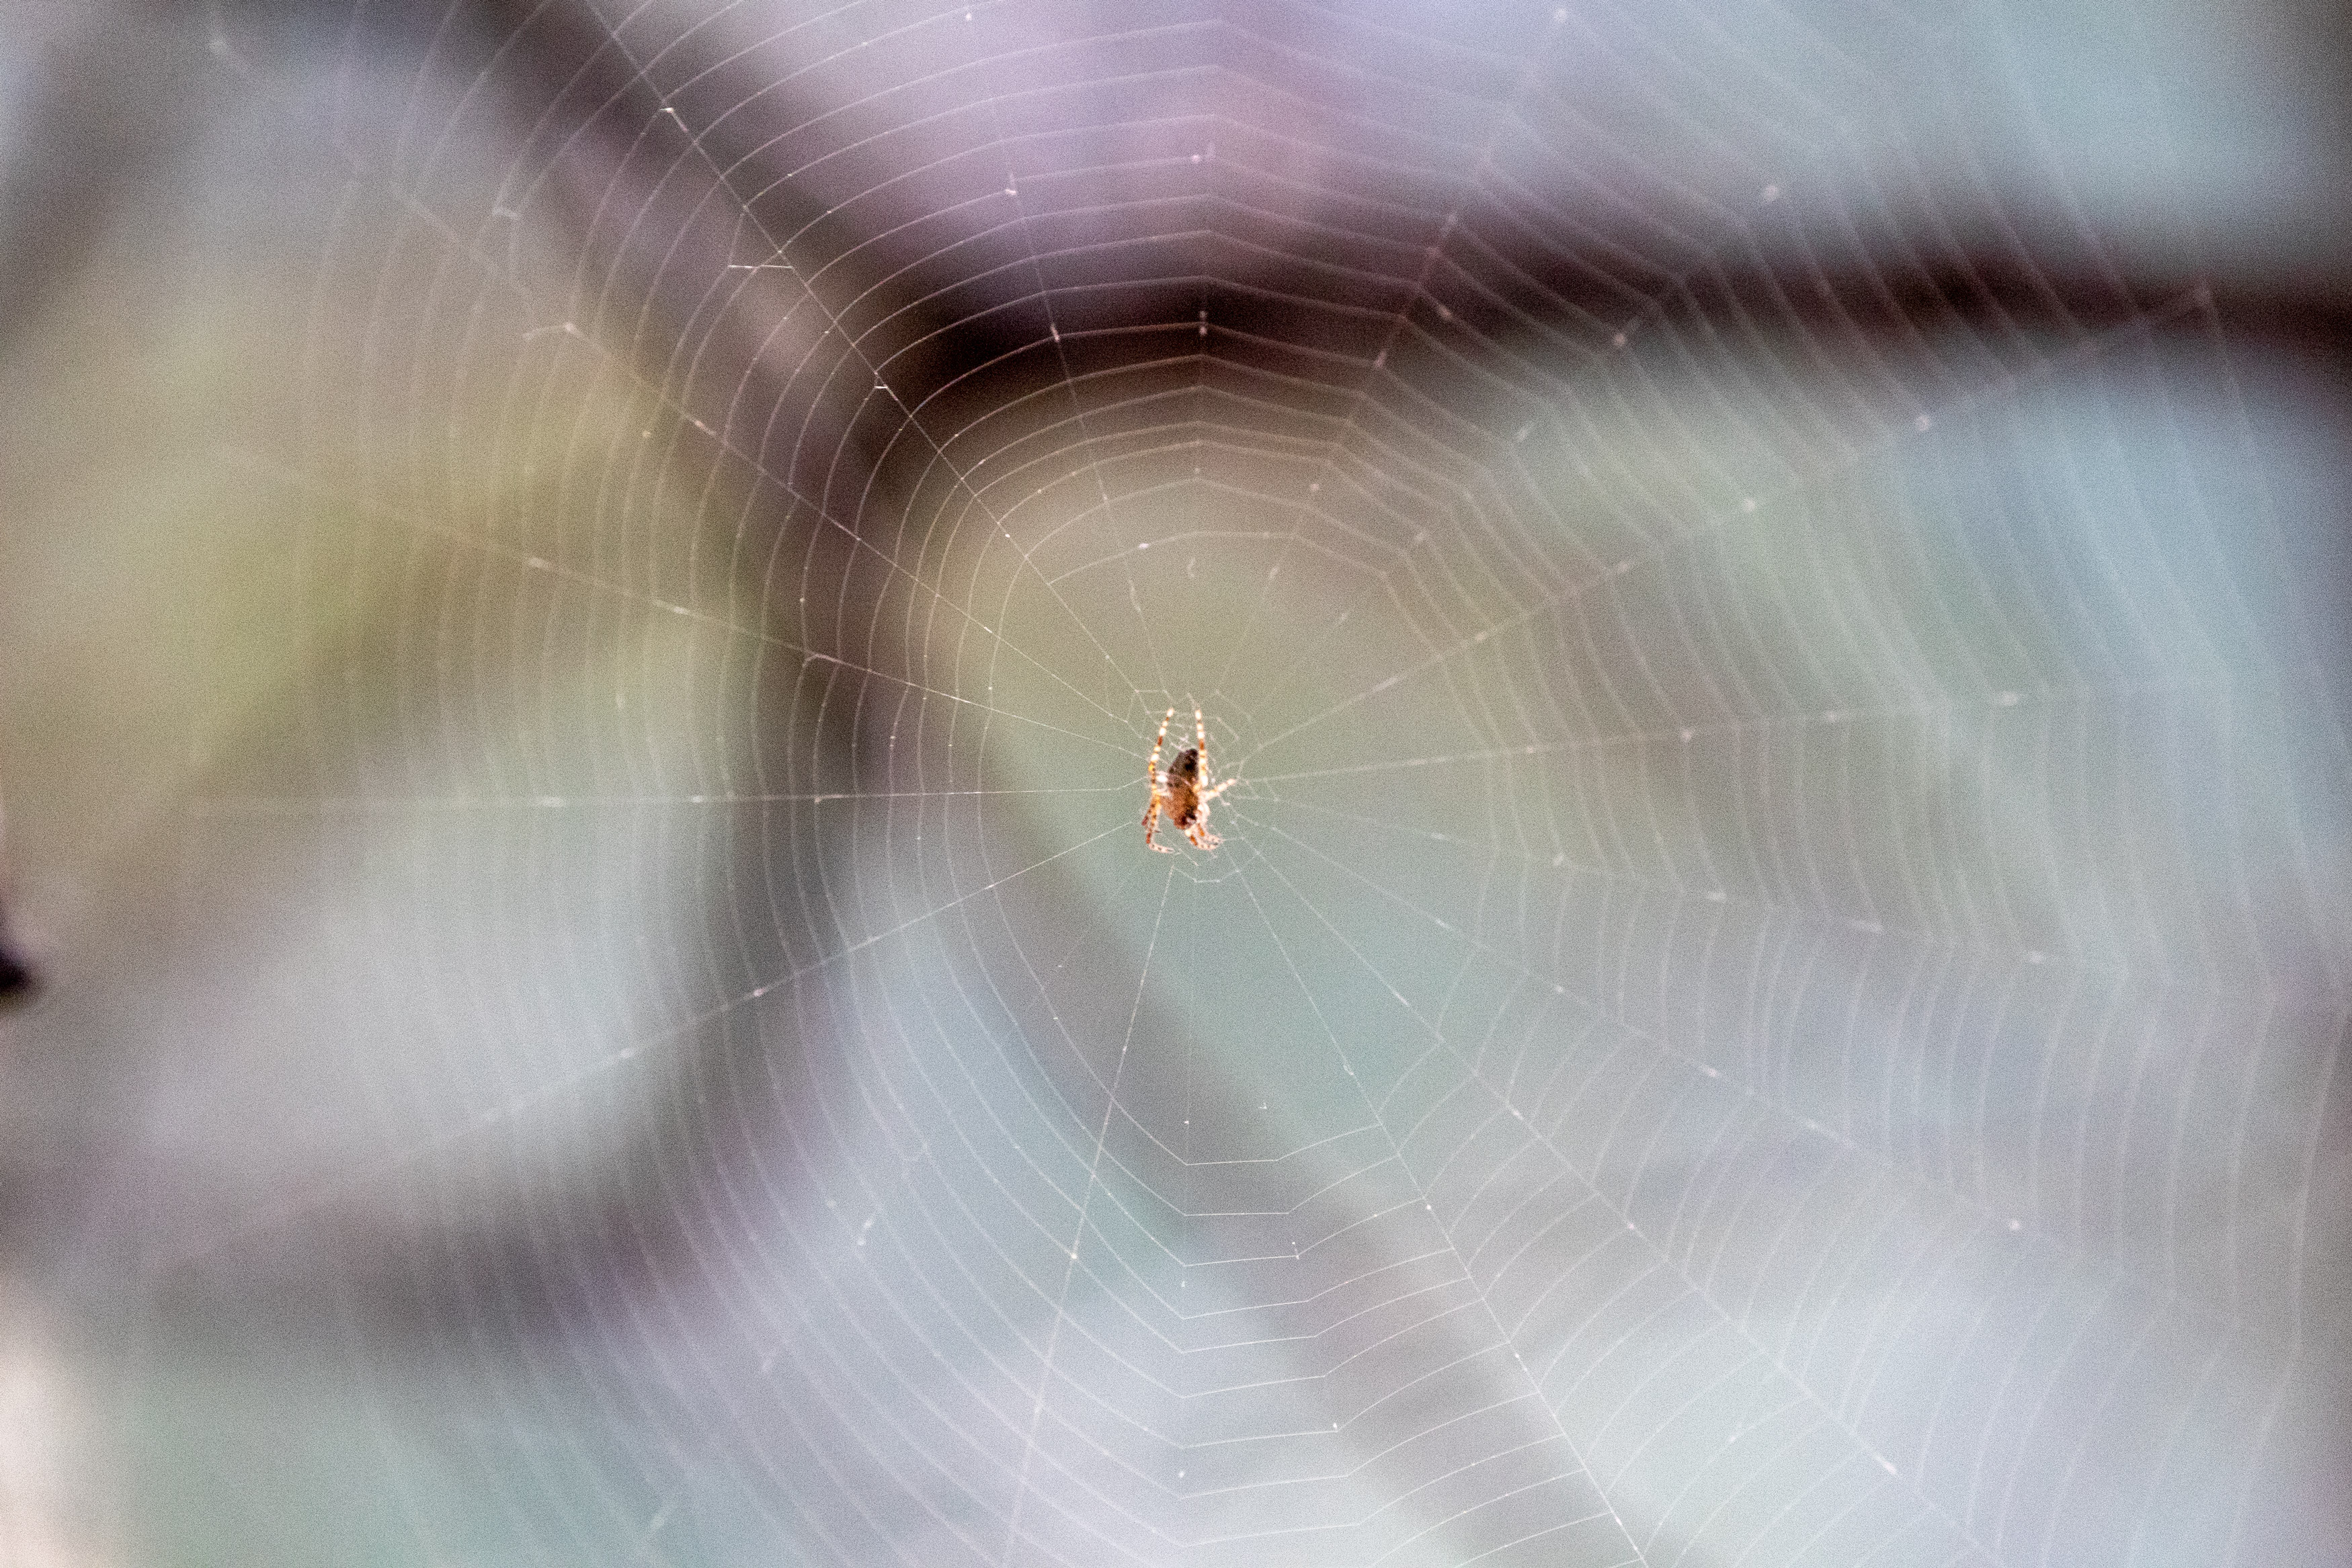 Spider in the middle of a spider web